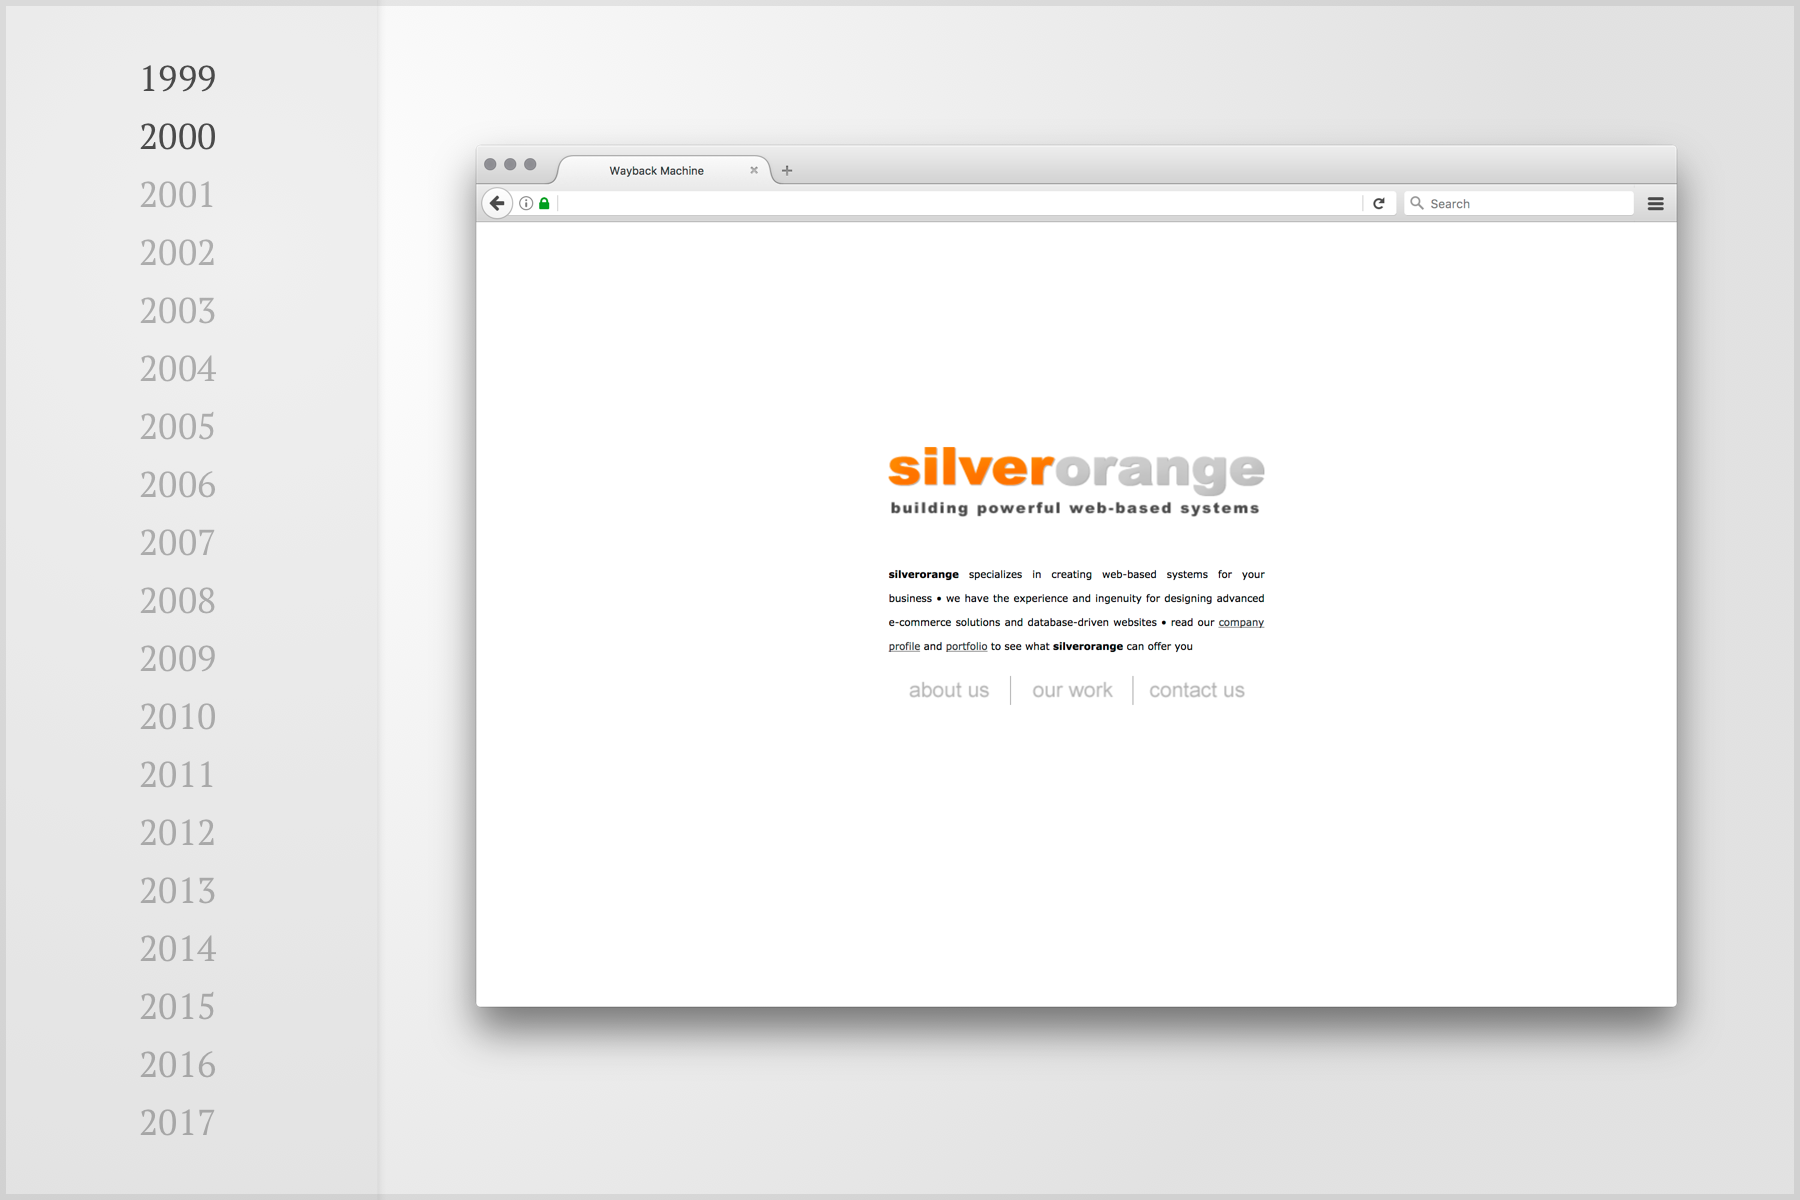 Screenshot of silverorange website in 1999 and 2000 with simple layout